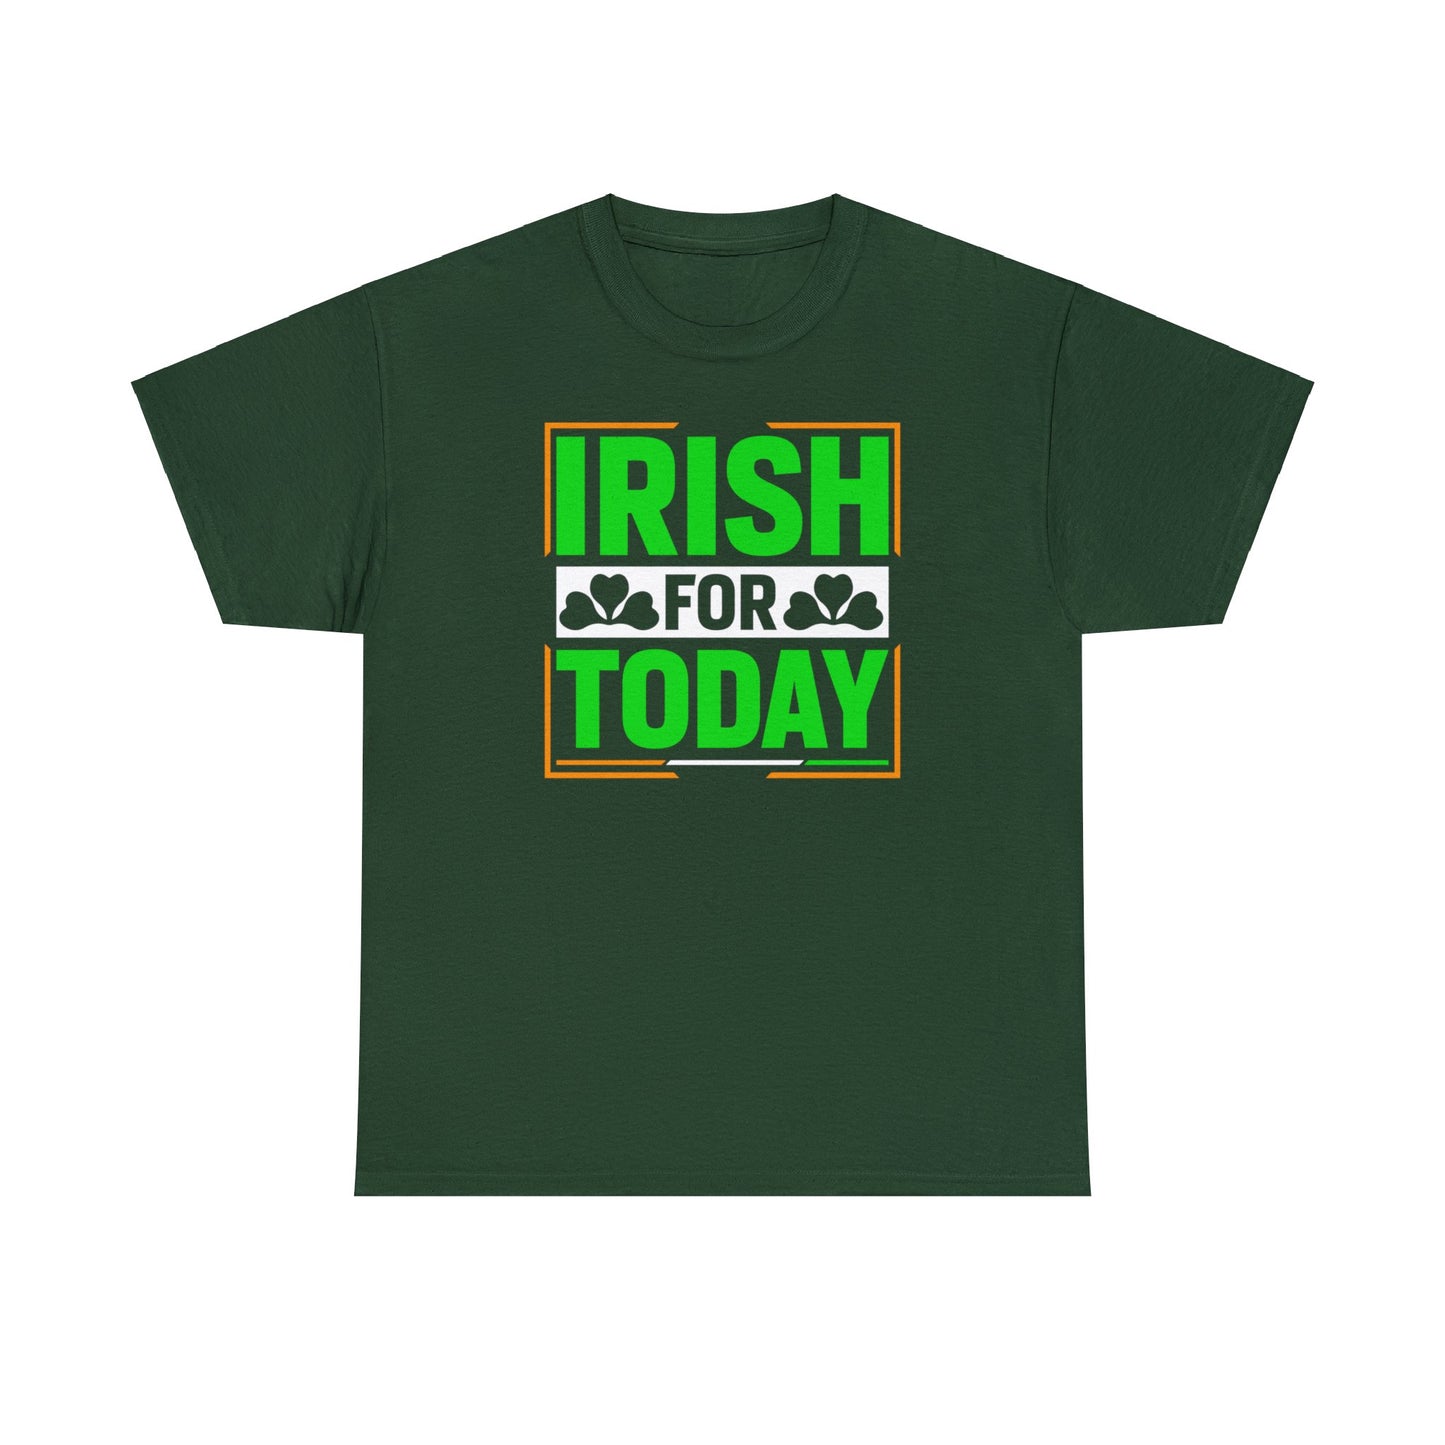 Irish For Today T-Shirt For St Patricks Day T Shirt For St Paddy's Day TShirt